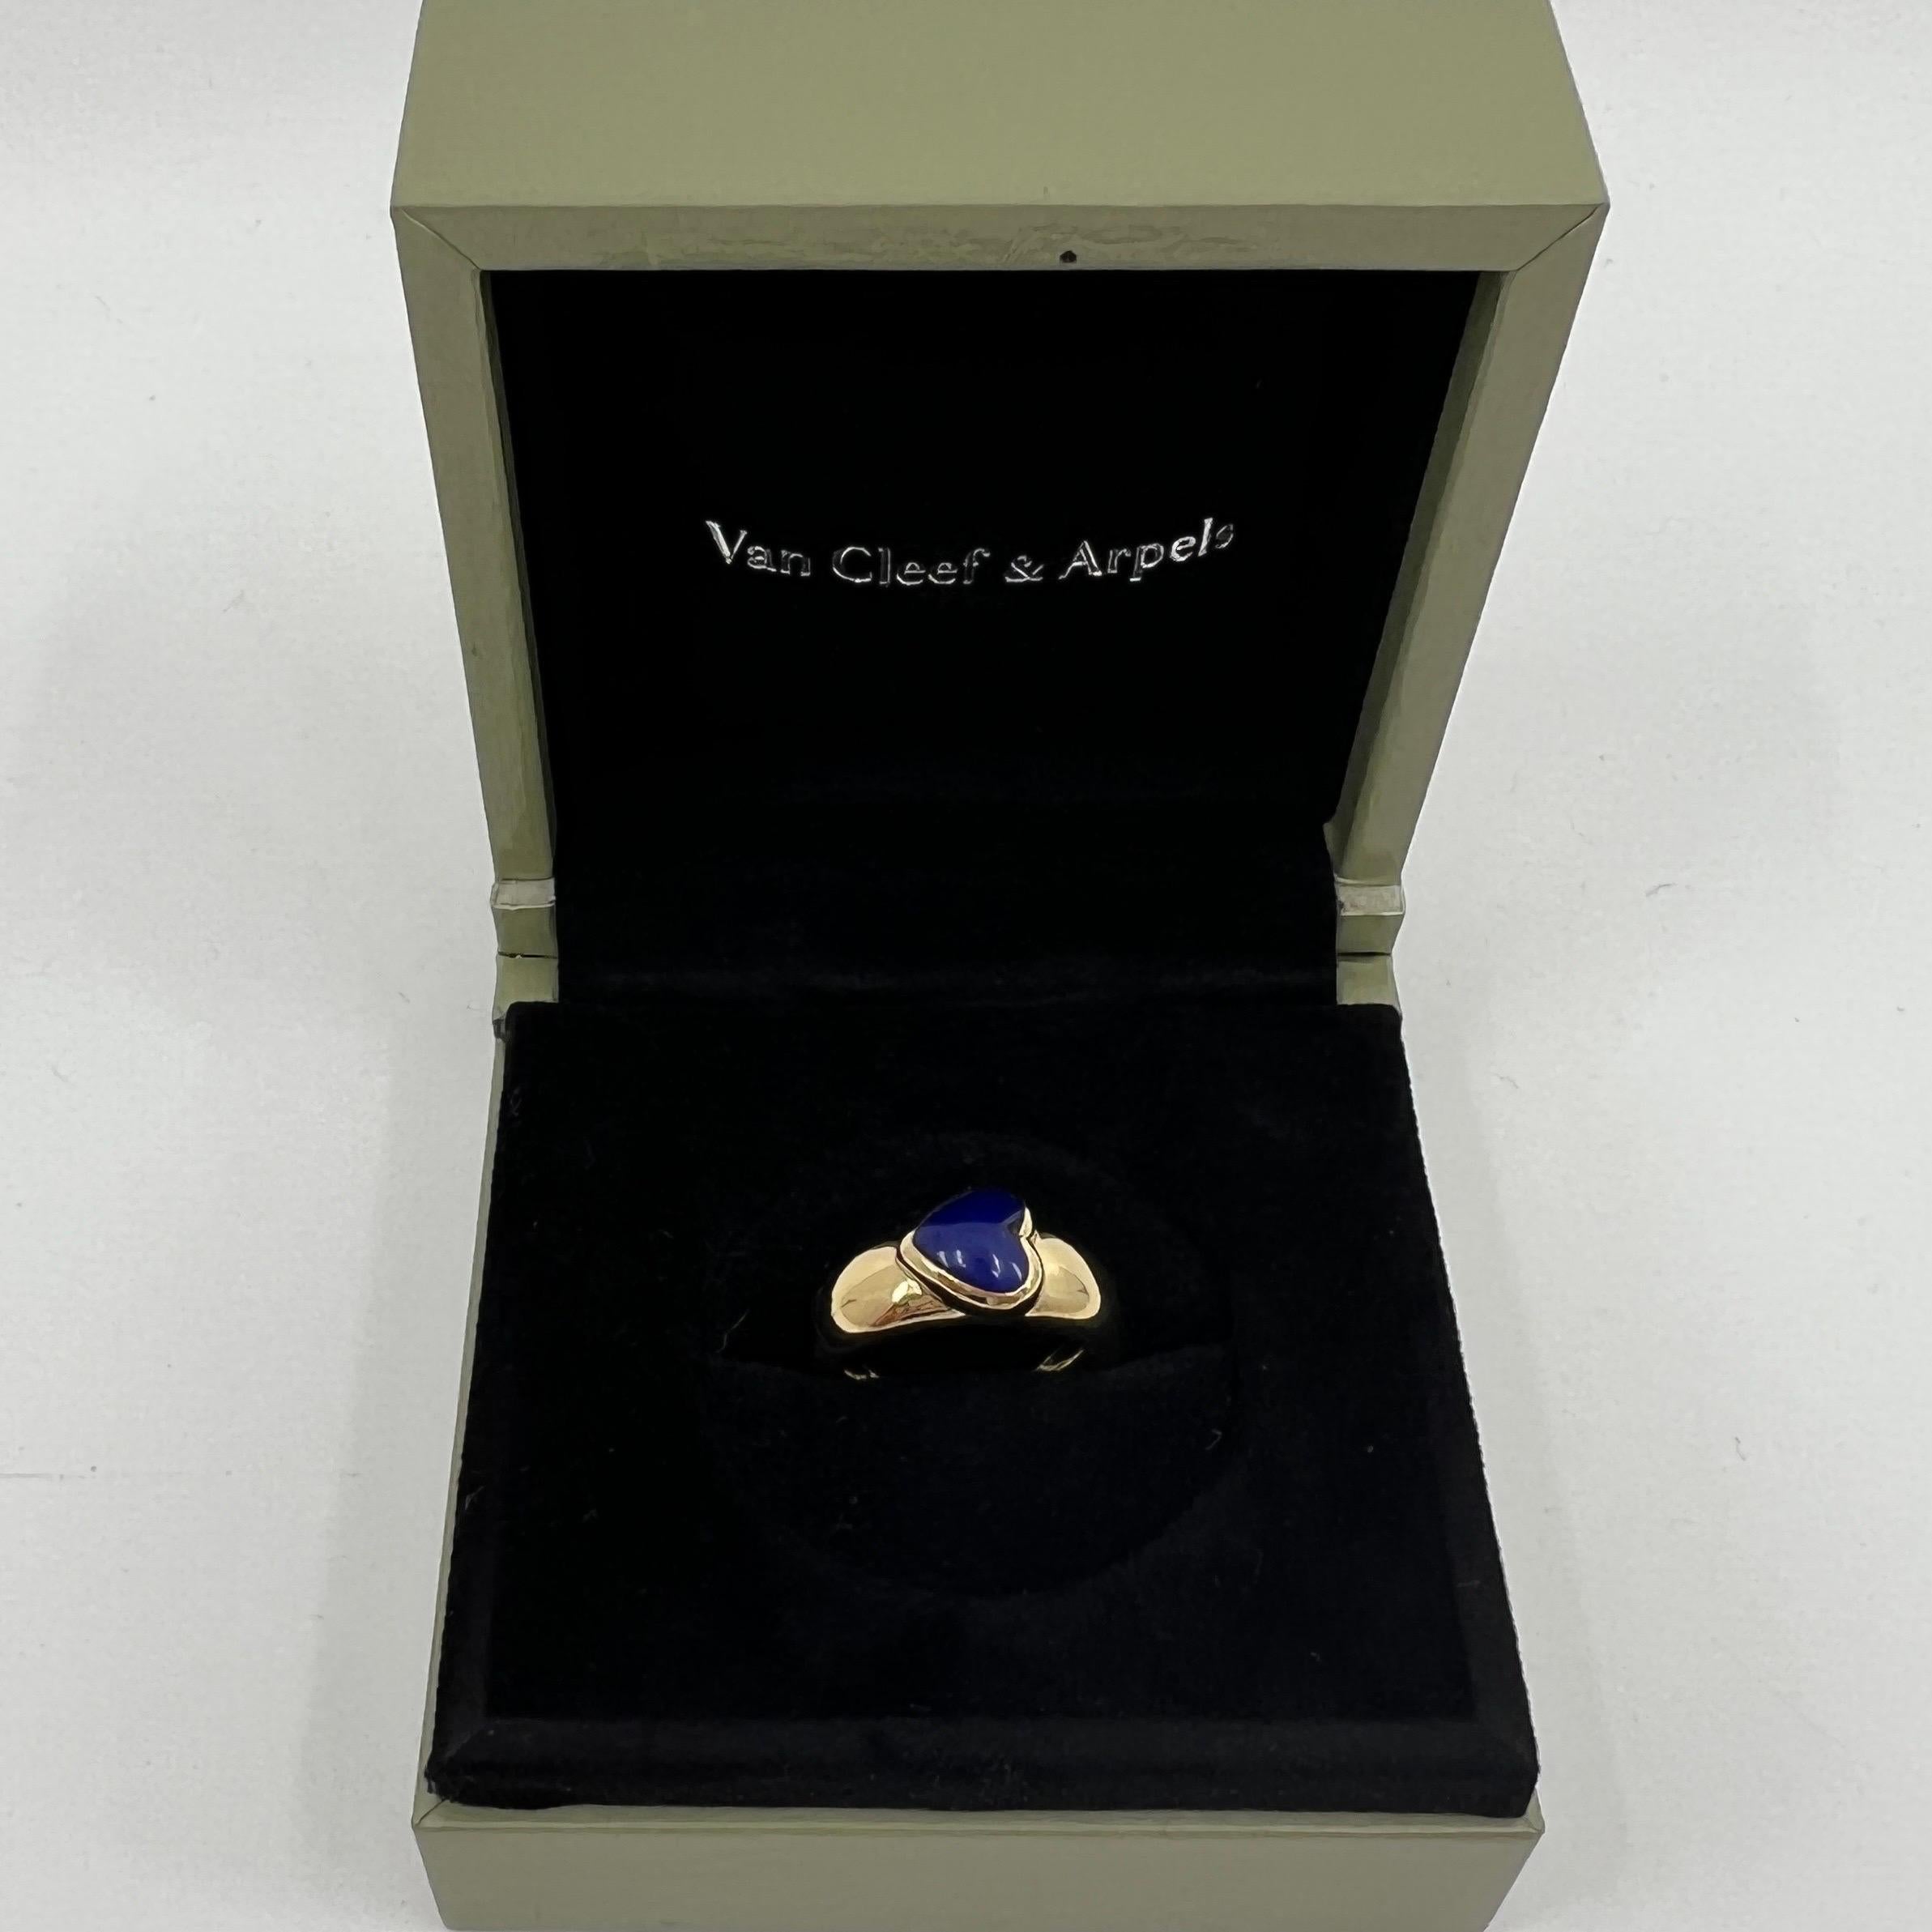 Rare Vintage Van Cleef & Arpels 18k Yellow Gold Lapis Lazuli Heart Ring.

A stunning vintage ring with a beautiful heart cut lapis lazuli set in the centre. Fine jewellery houses like Van Cleef & Arpels only use the finest natural gemstones in their